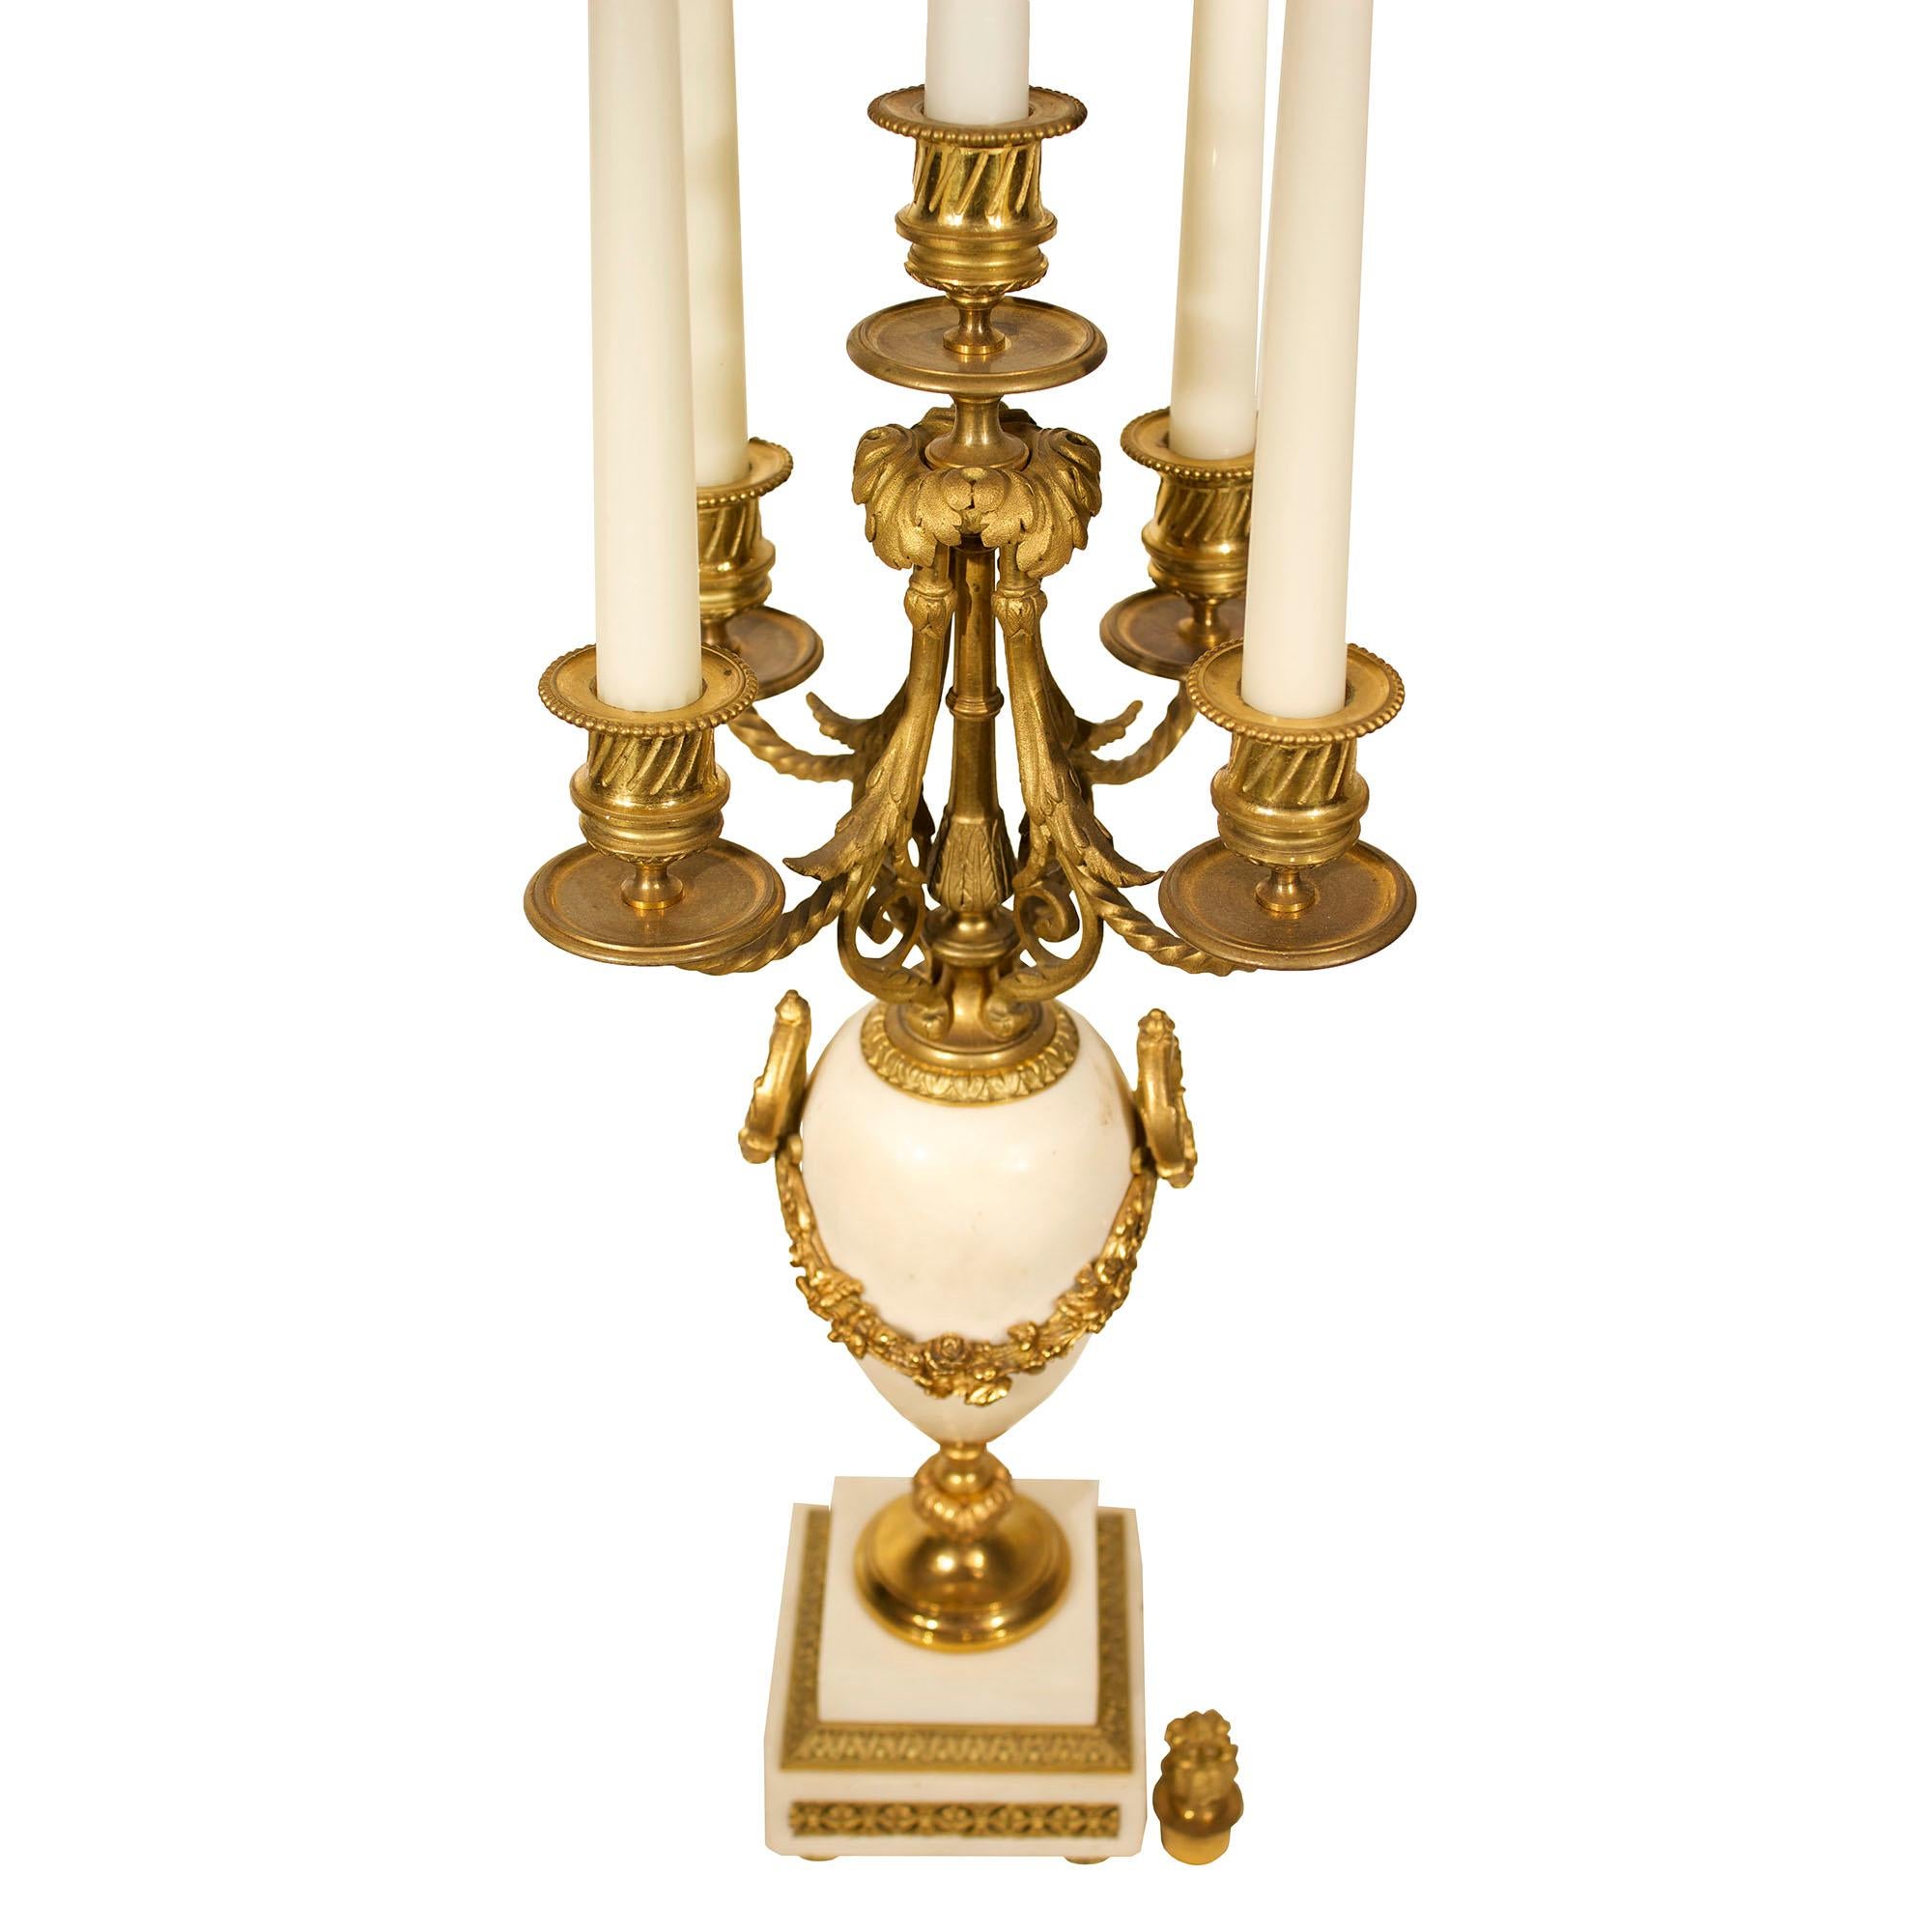 Pair of French Mid-19th Century Louis XVI Style Marble and Ormolu Candelabras In Good Condition For Sale In West Palm Beach, FL